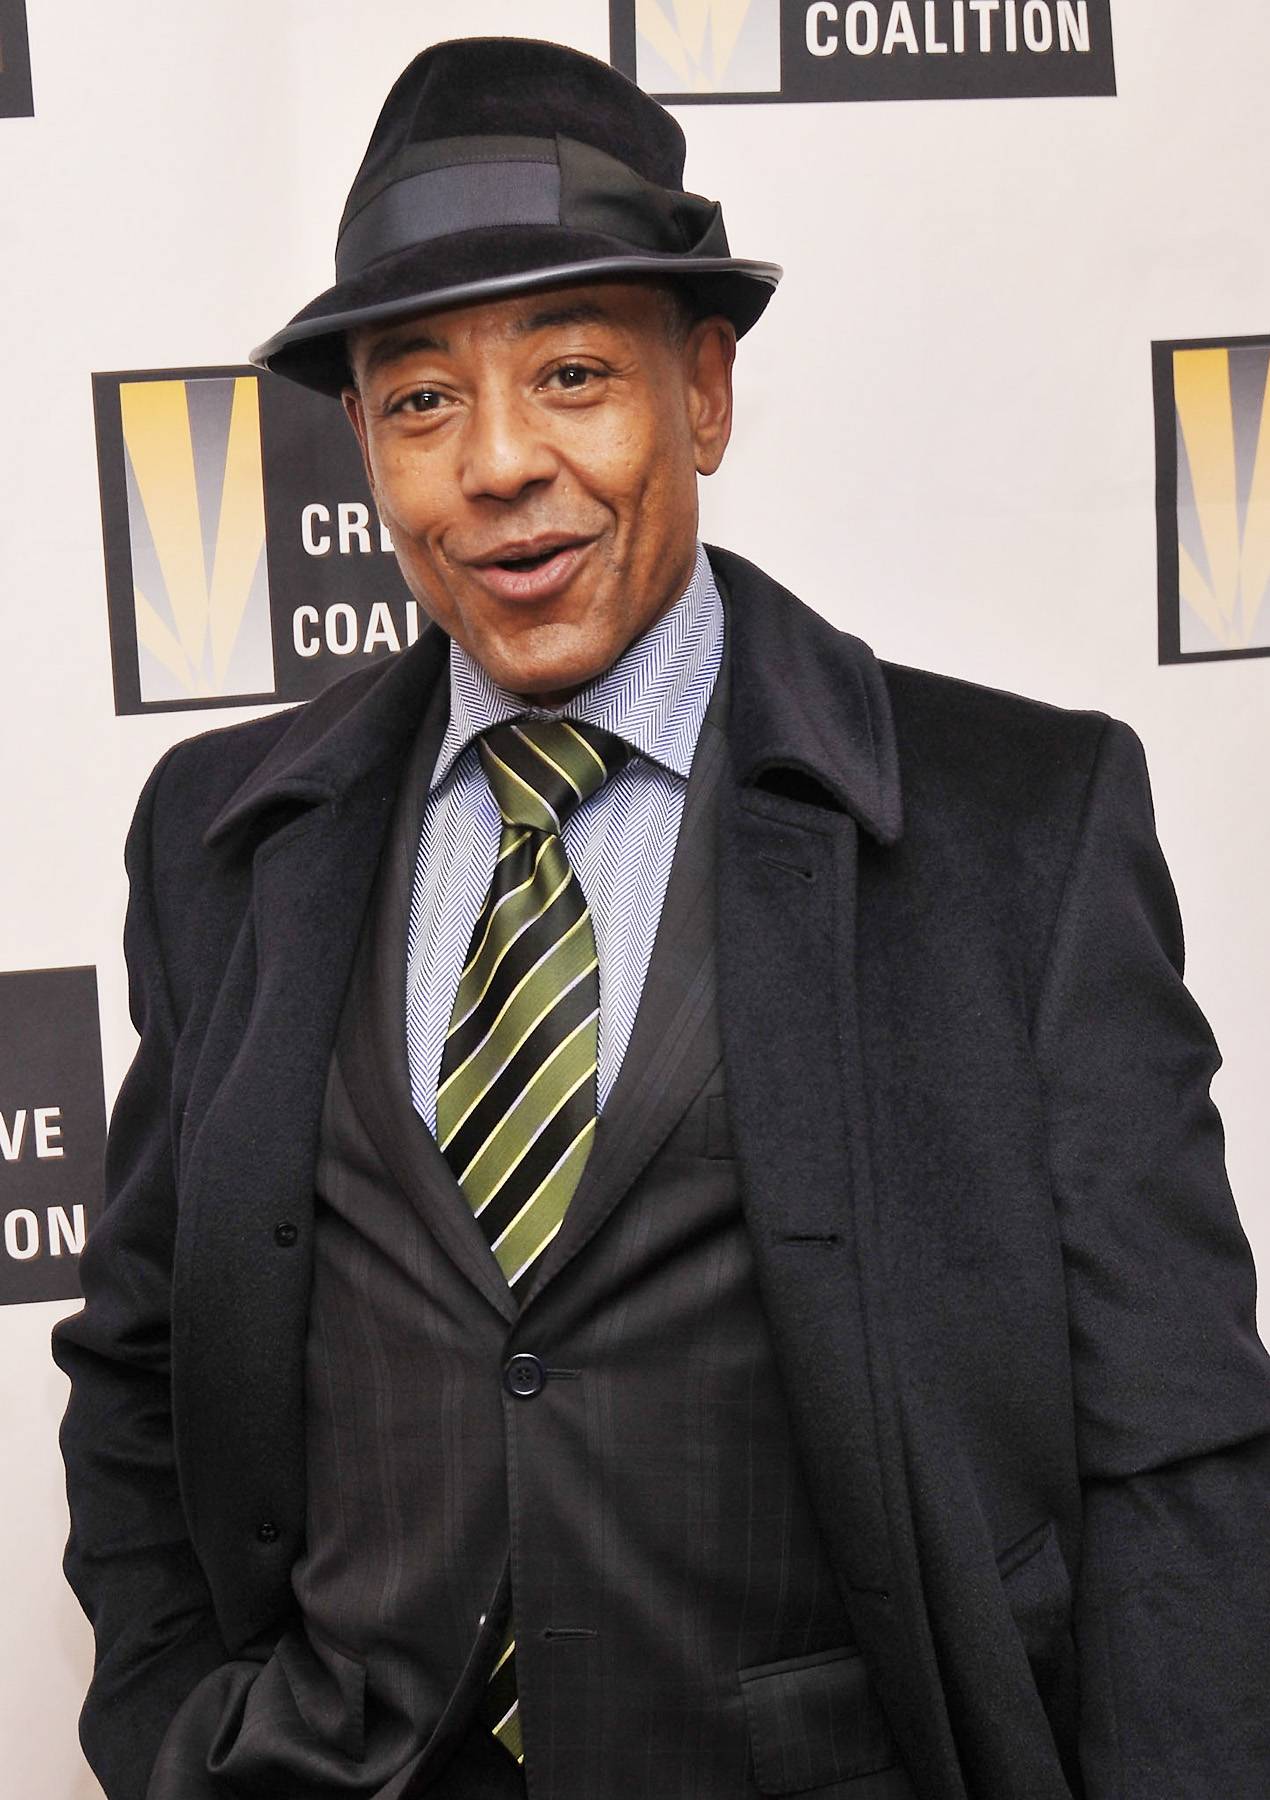 &lt;p&gt;Giancarlo Esposito made a name for himself in the Spike Lee movies &lt;i&gt;School Daze&lt;/i&gt;, &lt;i&gt;Do the Right Thing&lt;/i&gt; and &lt;i&gt;Mo Better Blues&lt;/i&gt;. Like many actors, Esposito got to play his most developed character, Gus, on TV show&lt;i&gt; Breaking Bad&lt;/i&gt;. &amp;nbsp; &lt;i&gt;(Photo: Stephen Lovekin/Getty Images)&lt;/i&gt;&lt;/p&gt;